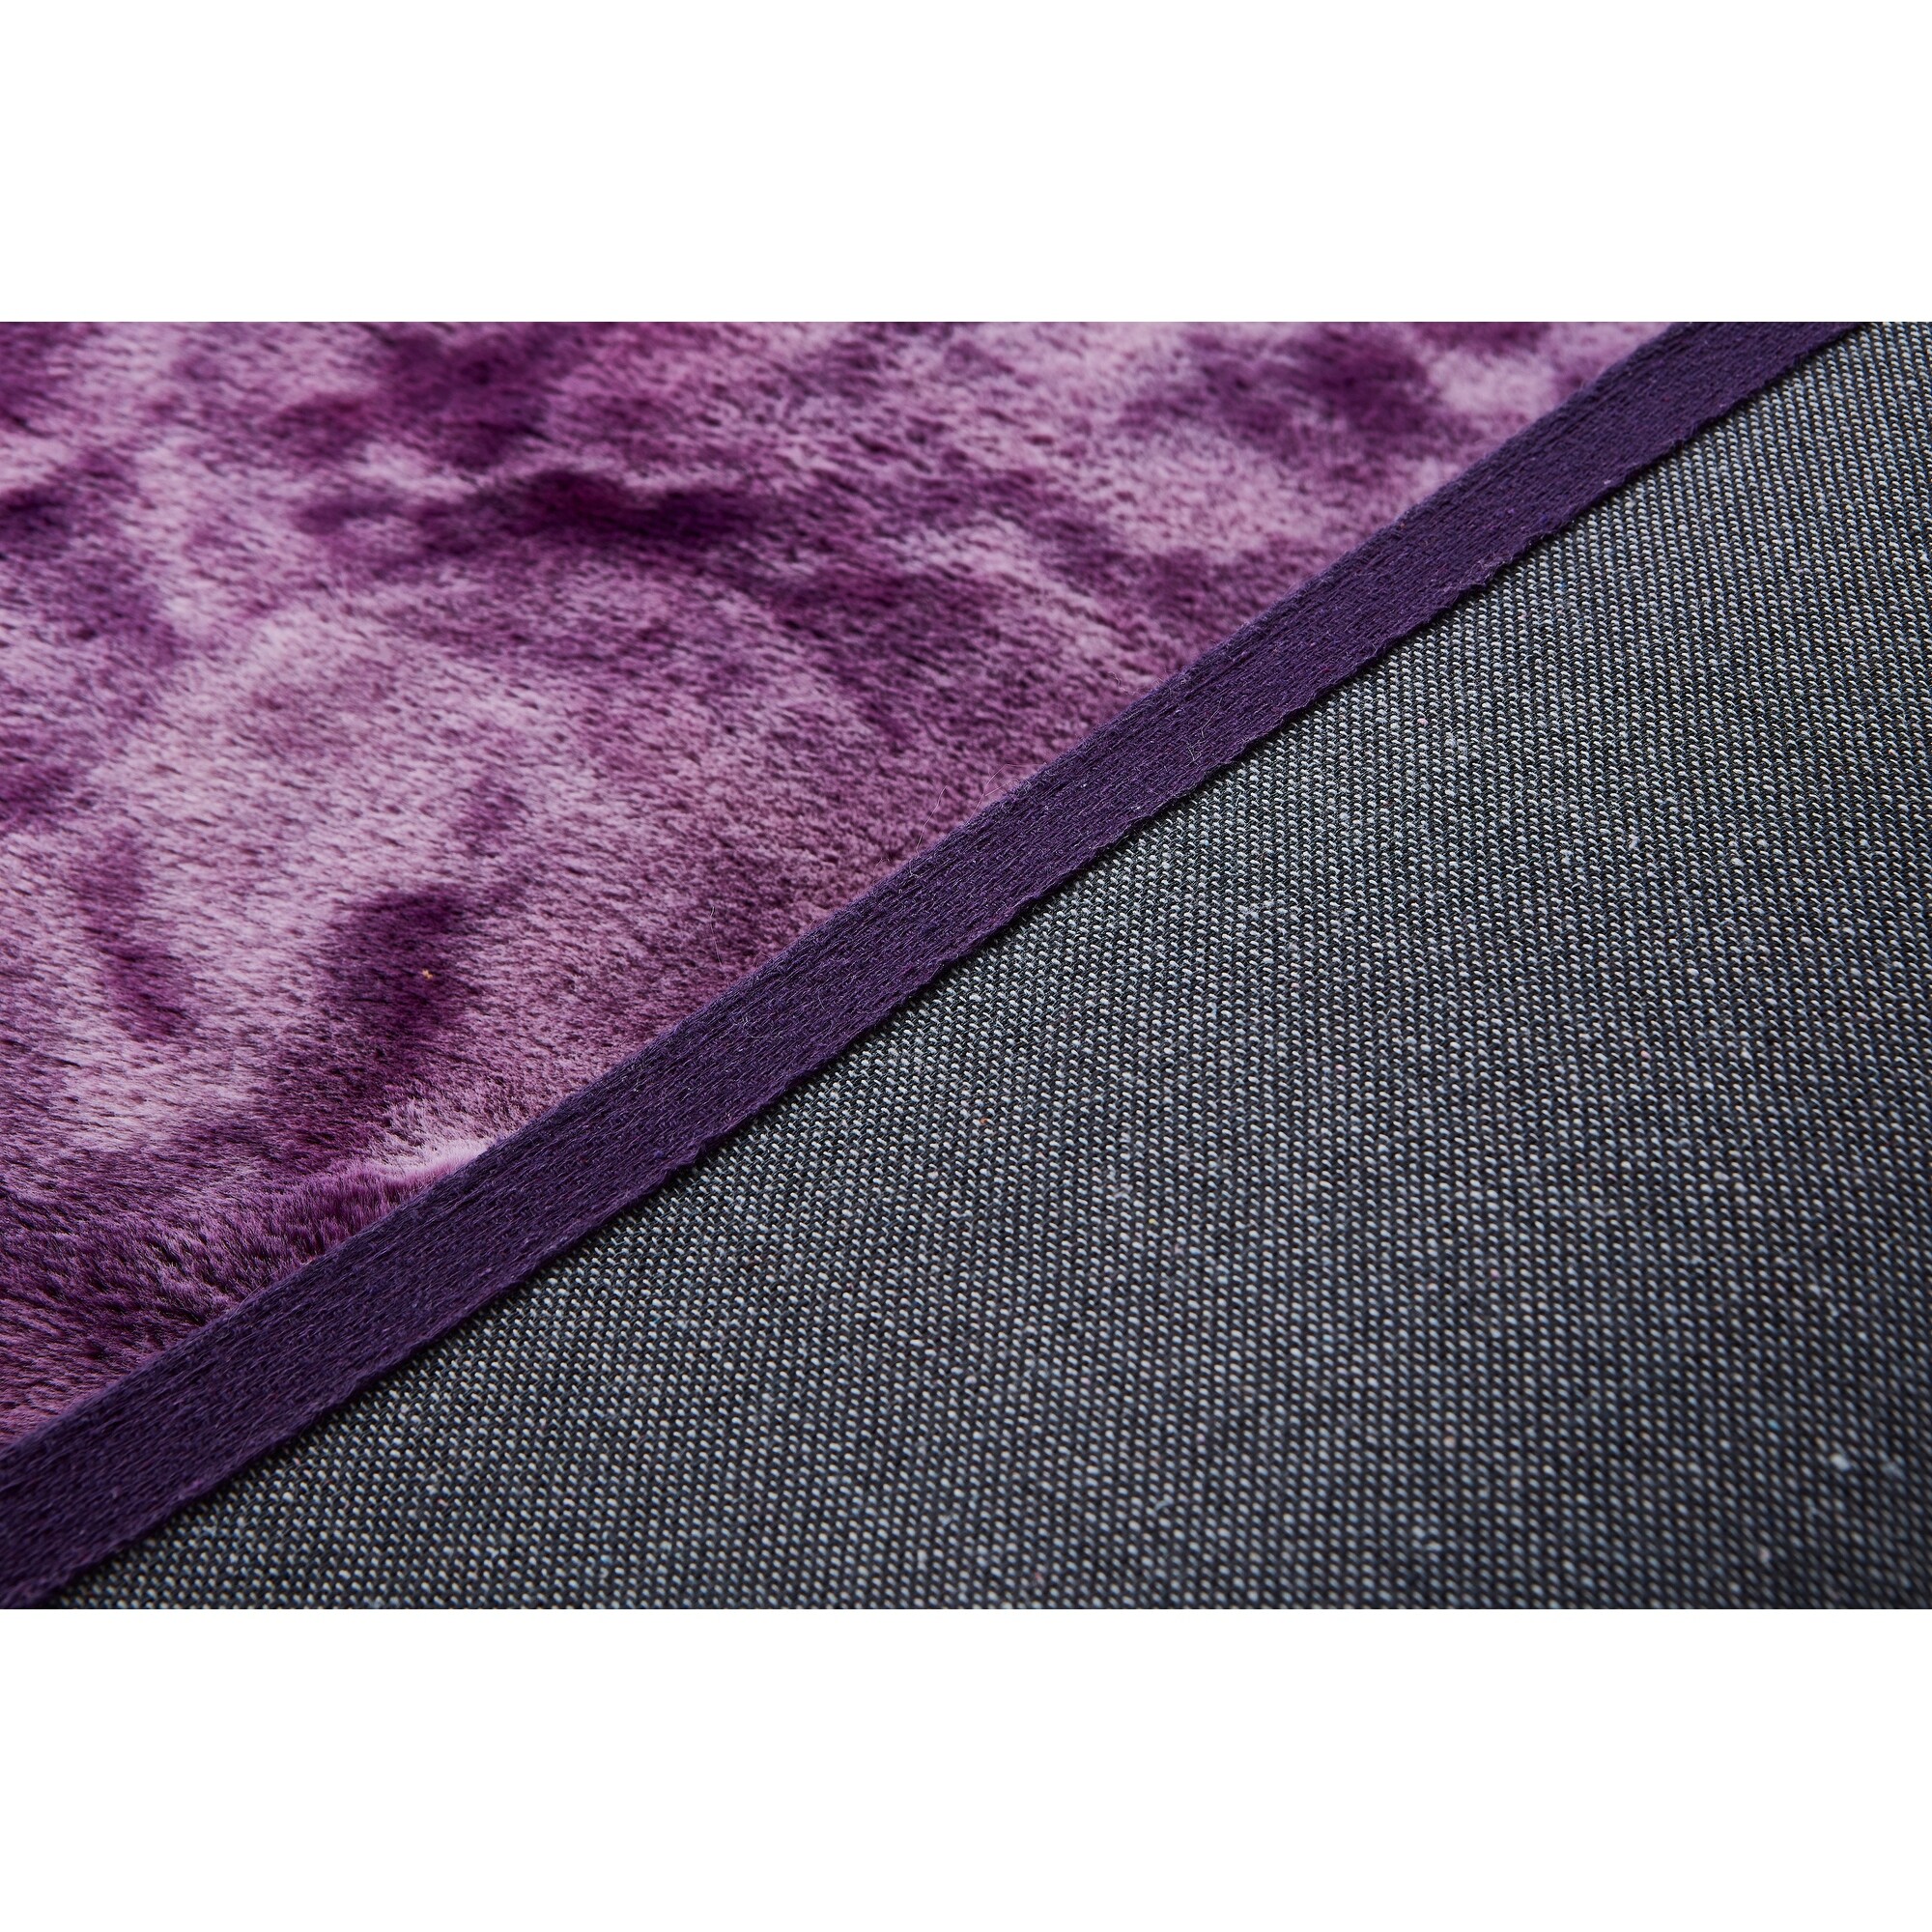 Amore Shag Collection Purple Textured Area Rug, 5' x 8' - 5' X 7'